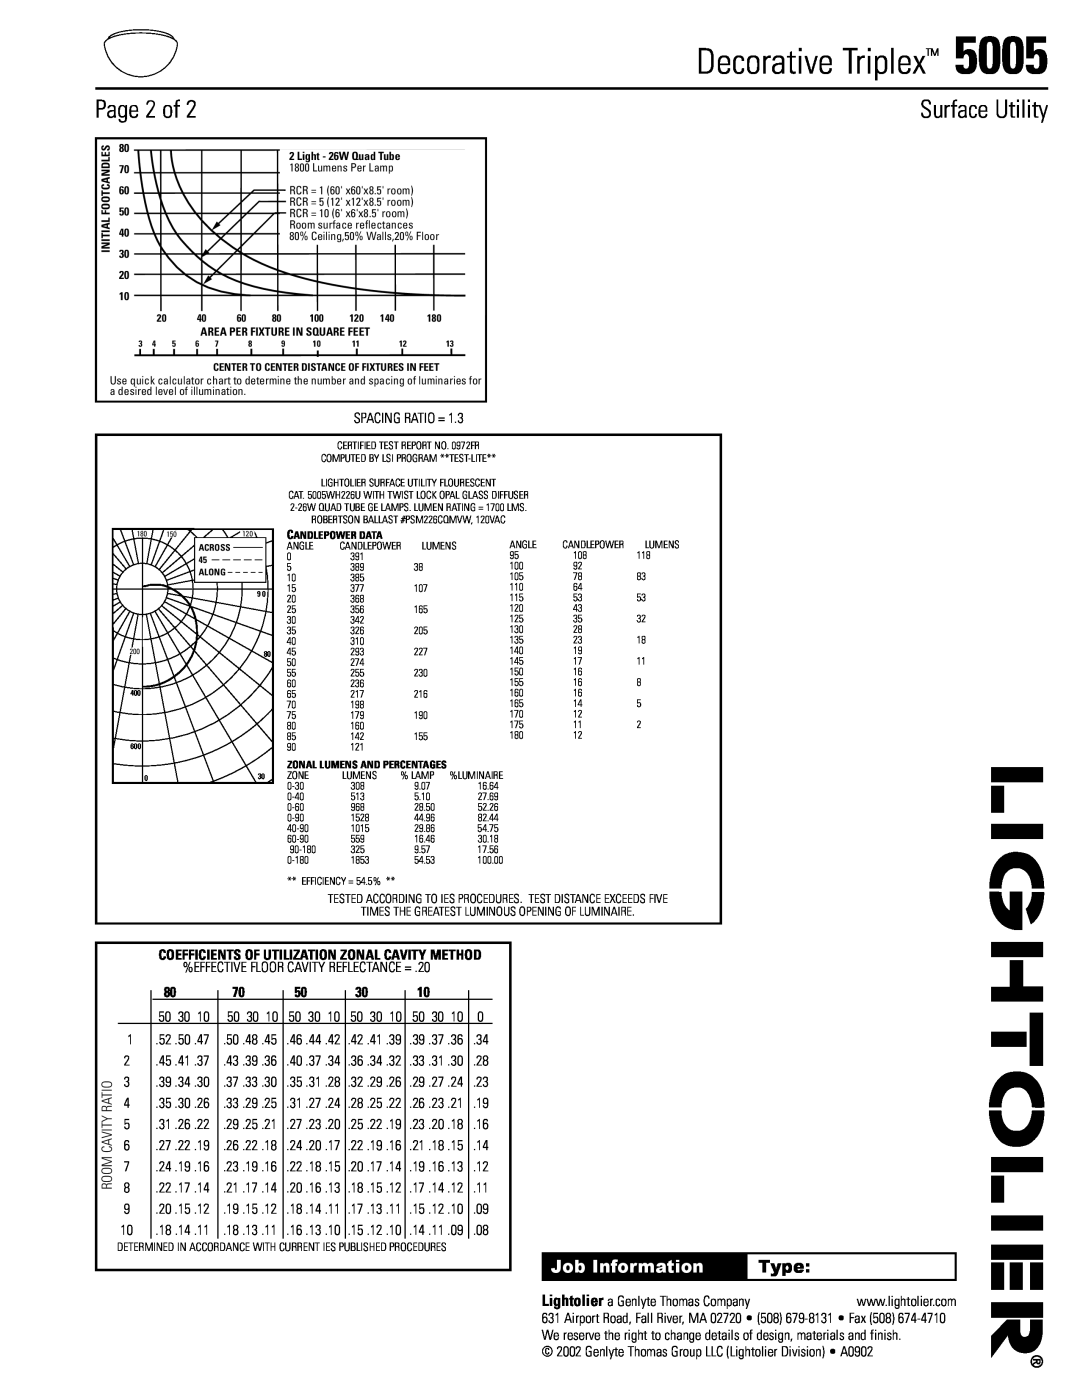 Lightolier 5005 manual 1200, Decorative Triplex, Surface Utility, Page 2 of, Job Information, Type 